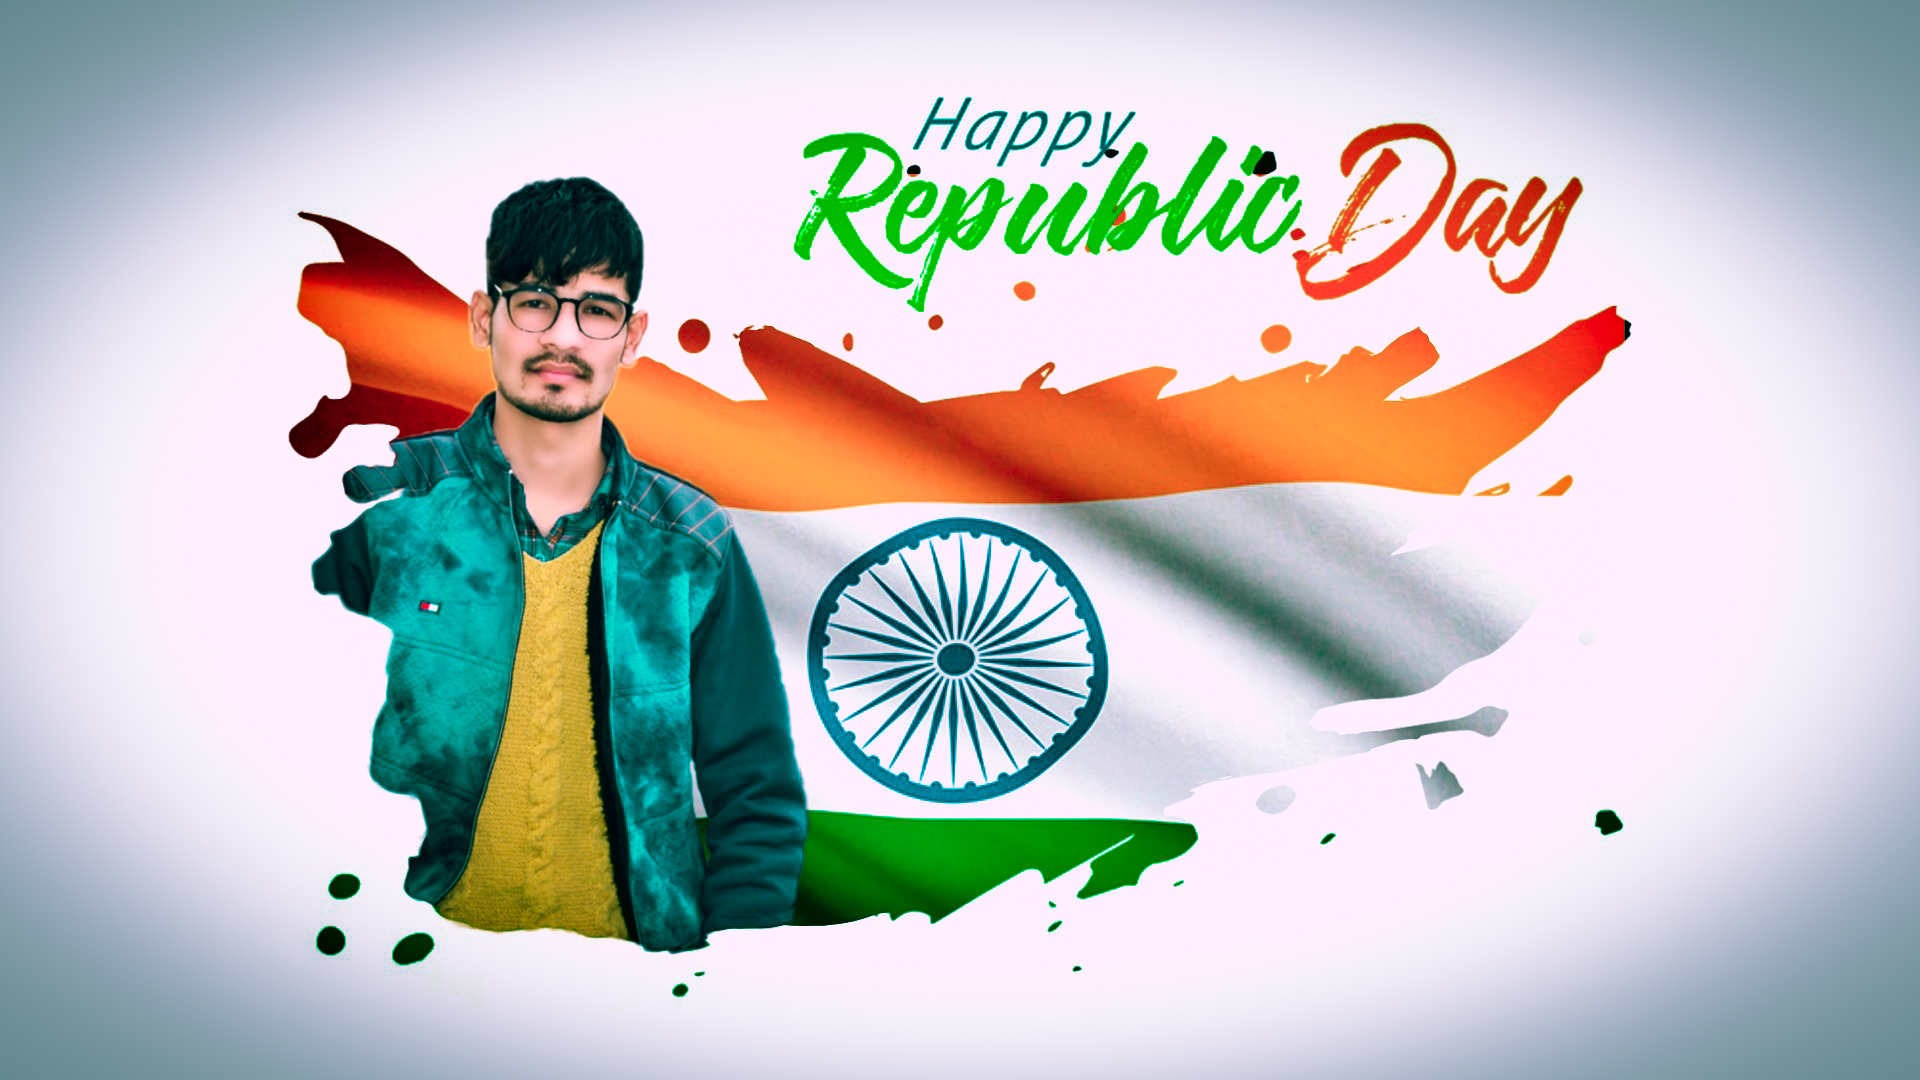 26 January Background For Picsart 2021 | 26 january background png | Happy  Republic Day Background in hindi 2021 ~ Movie Kaise Dekhe, Movie Review